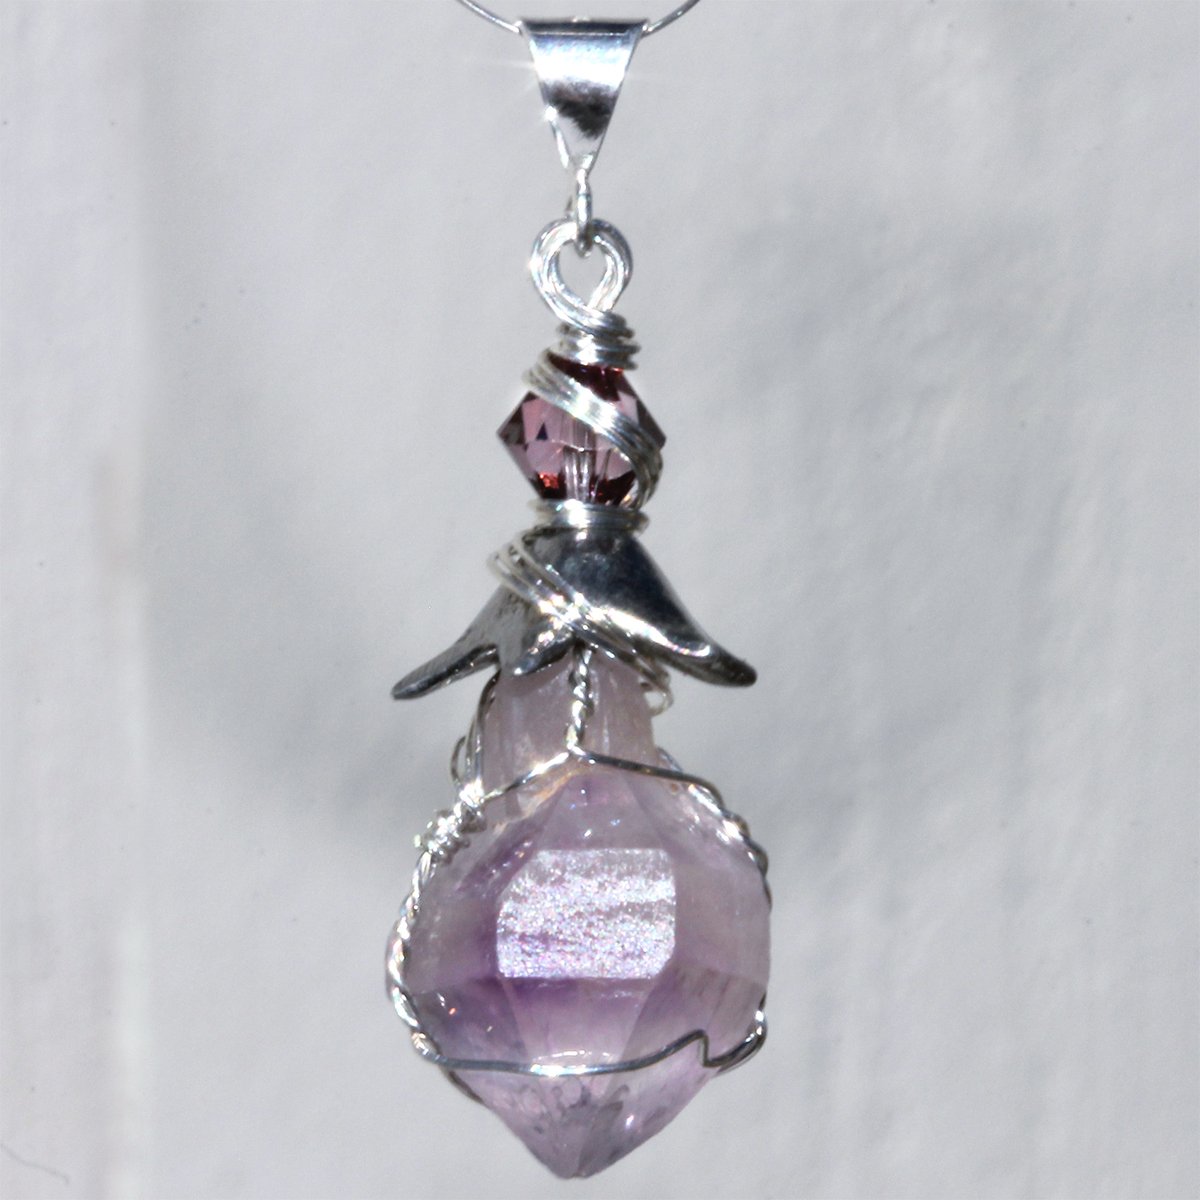 Madagascar Amethyst Scepter Crystal Wire Wrapped Pendant